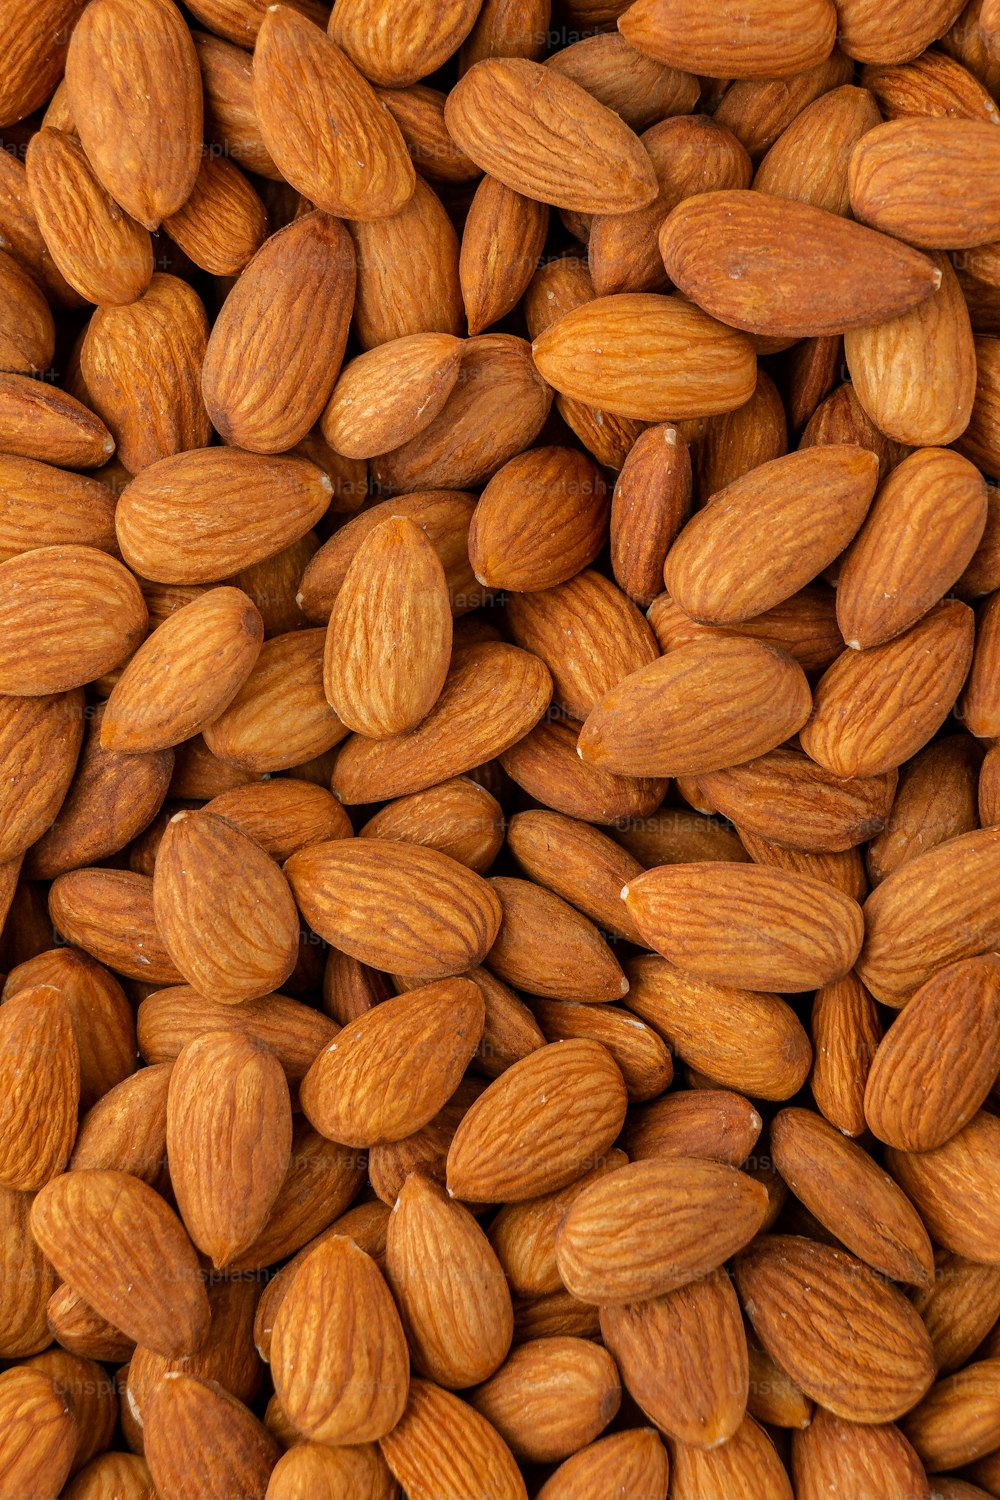 a pile of almonds is shown close up